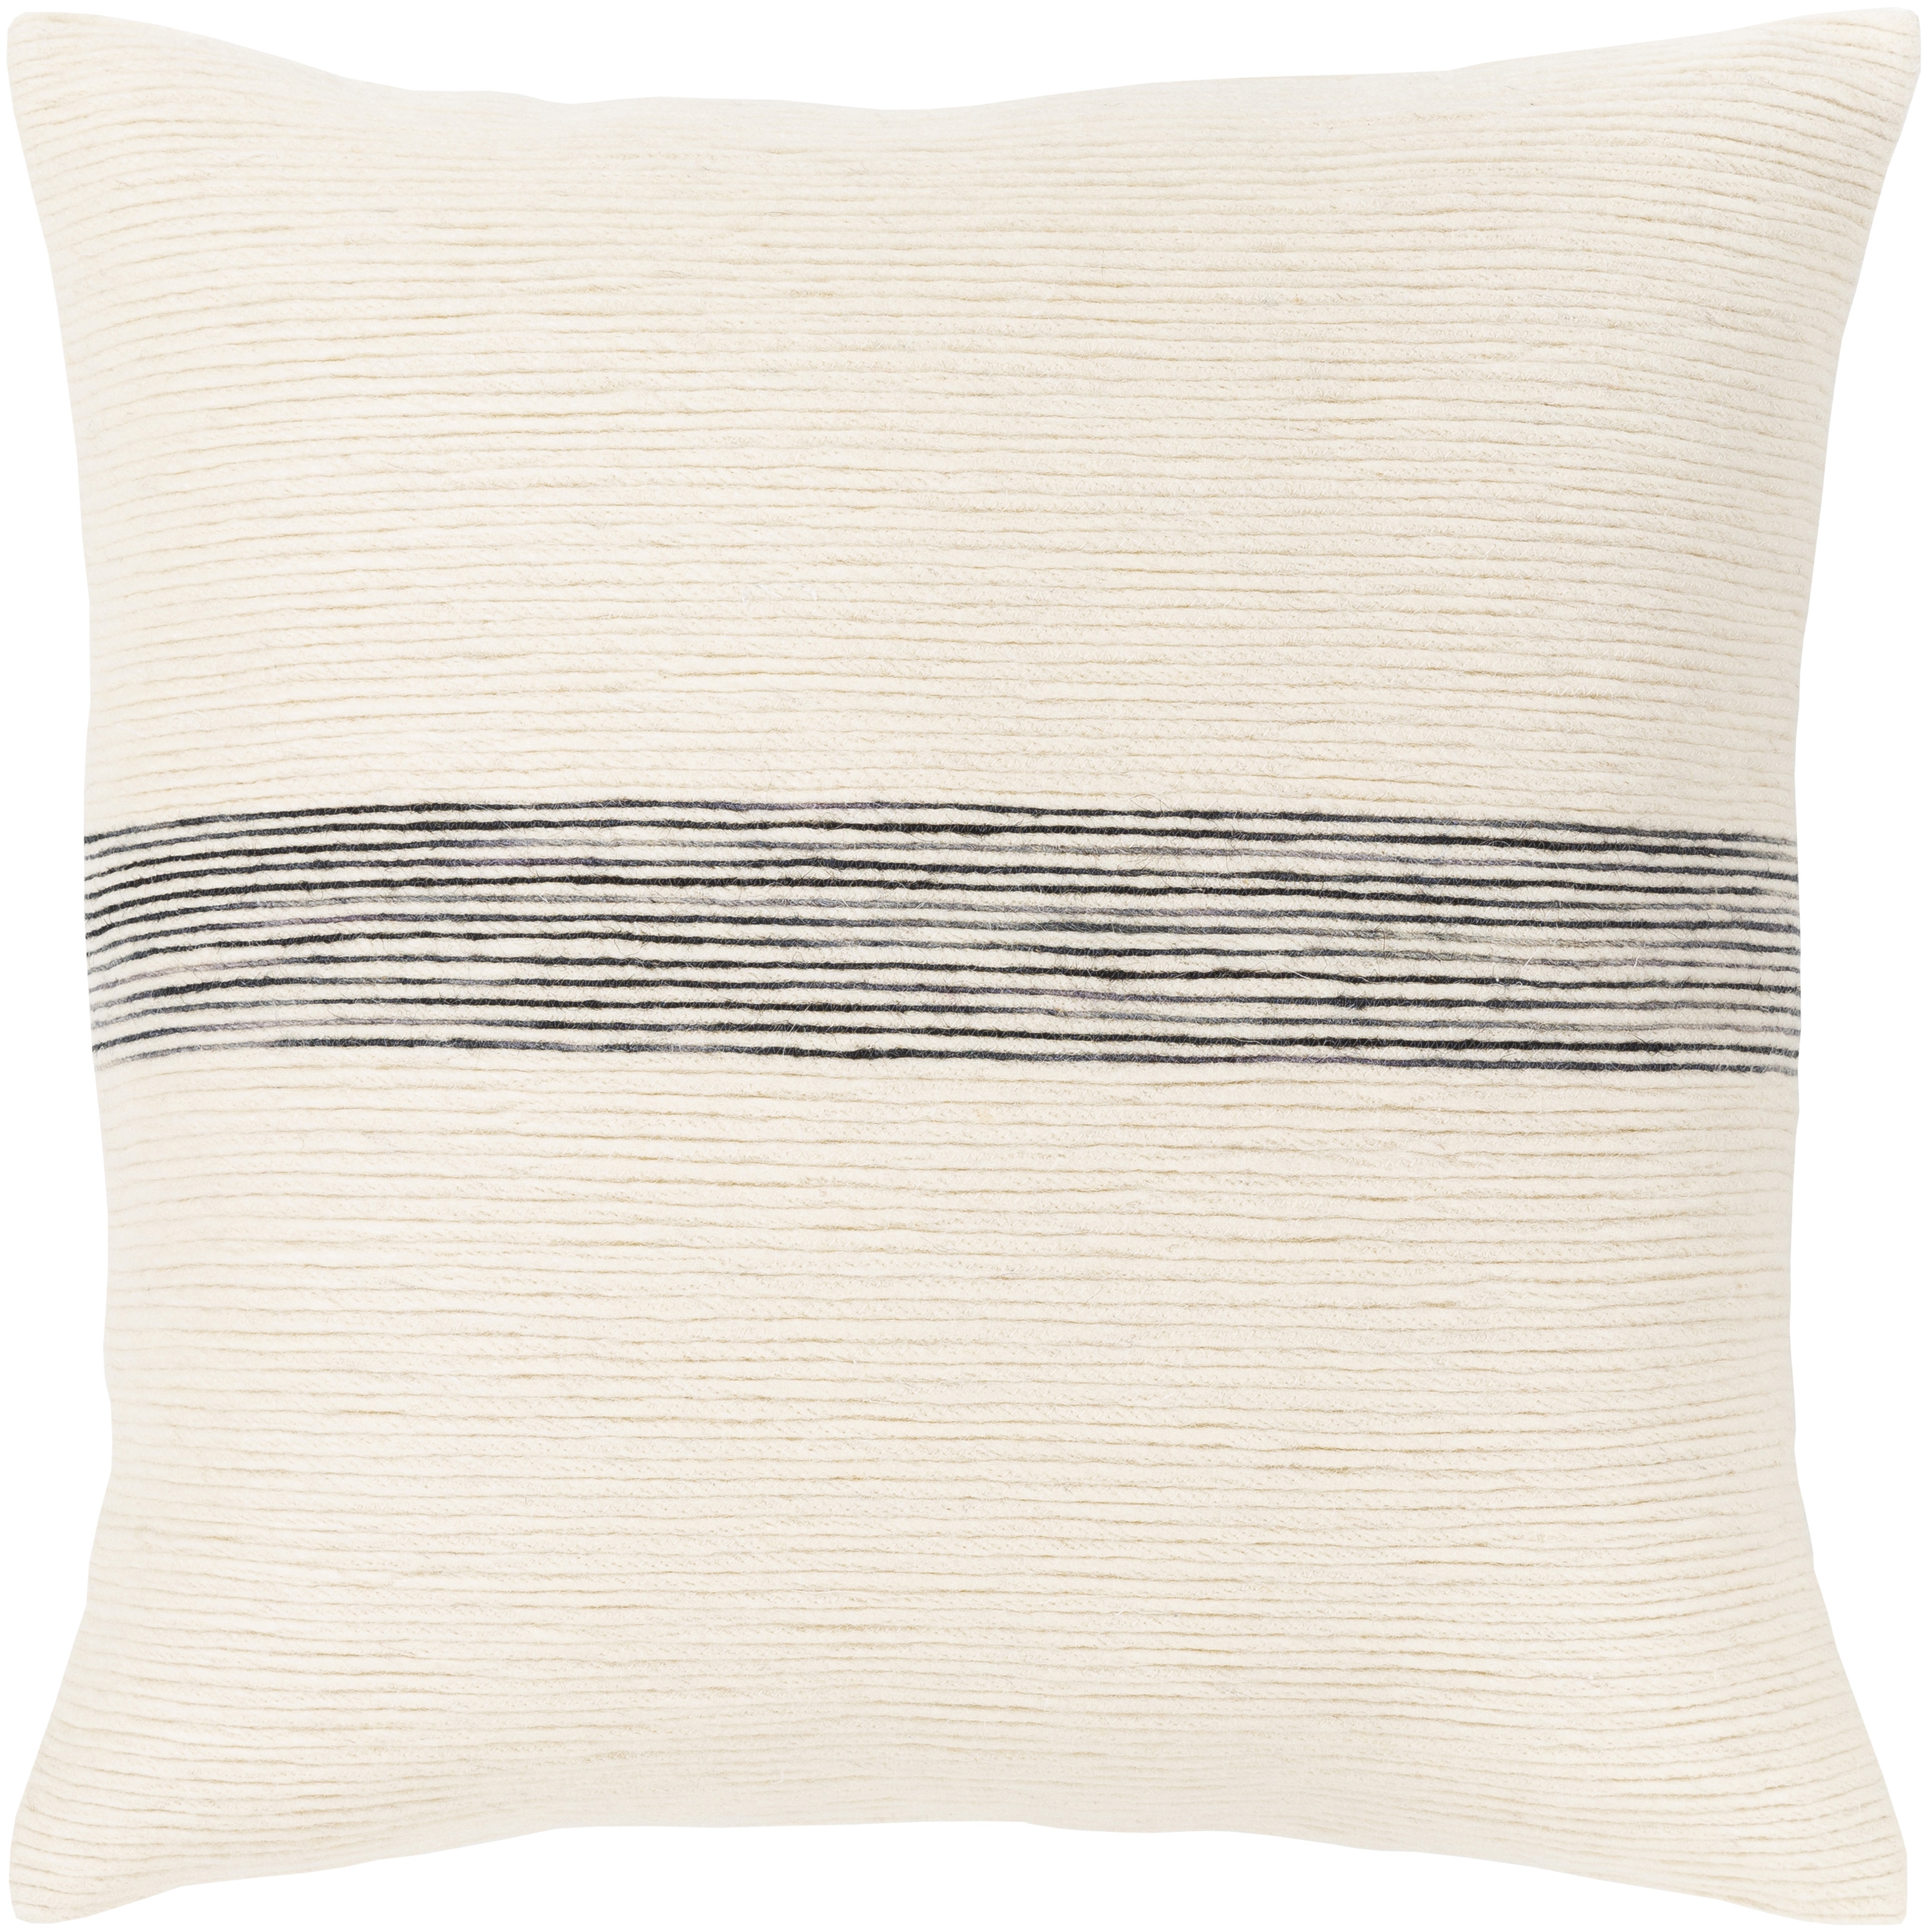 Carine Throw Pillow, 20" x 20", with down insert - Image 0